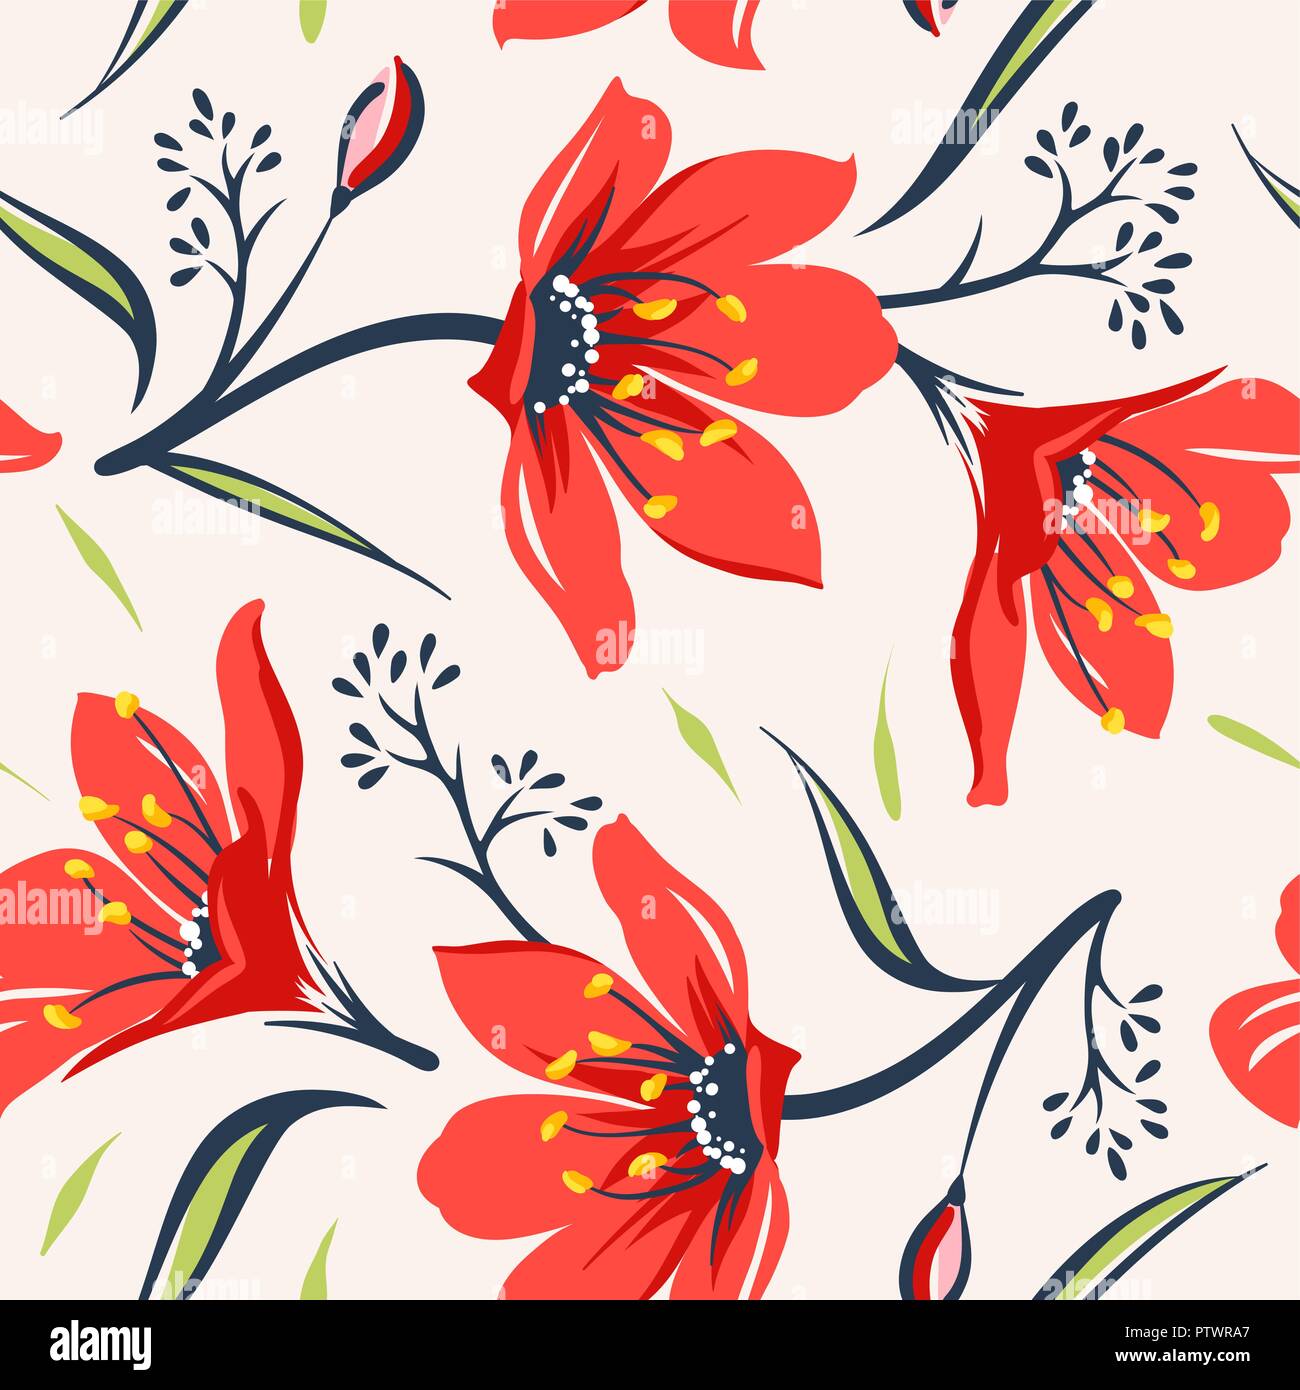 Floral seamless background with red wildflowers. Use for fabric design, pattern fills and decorating greeting cards or invitations Stock Vector